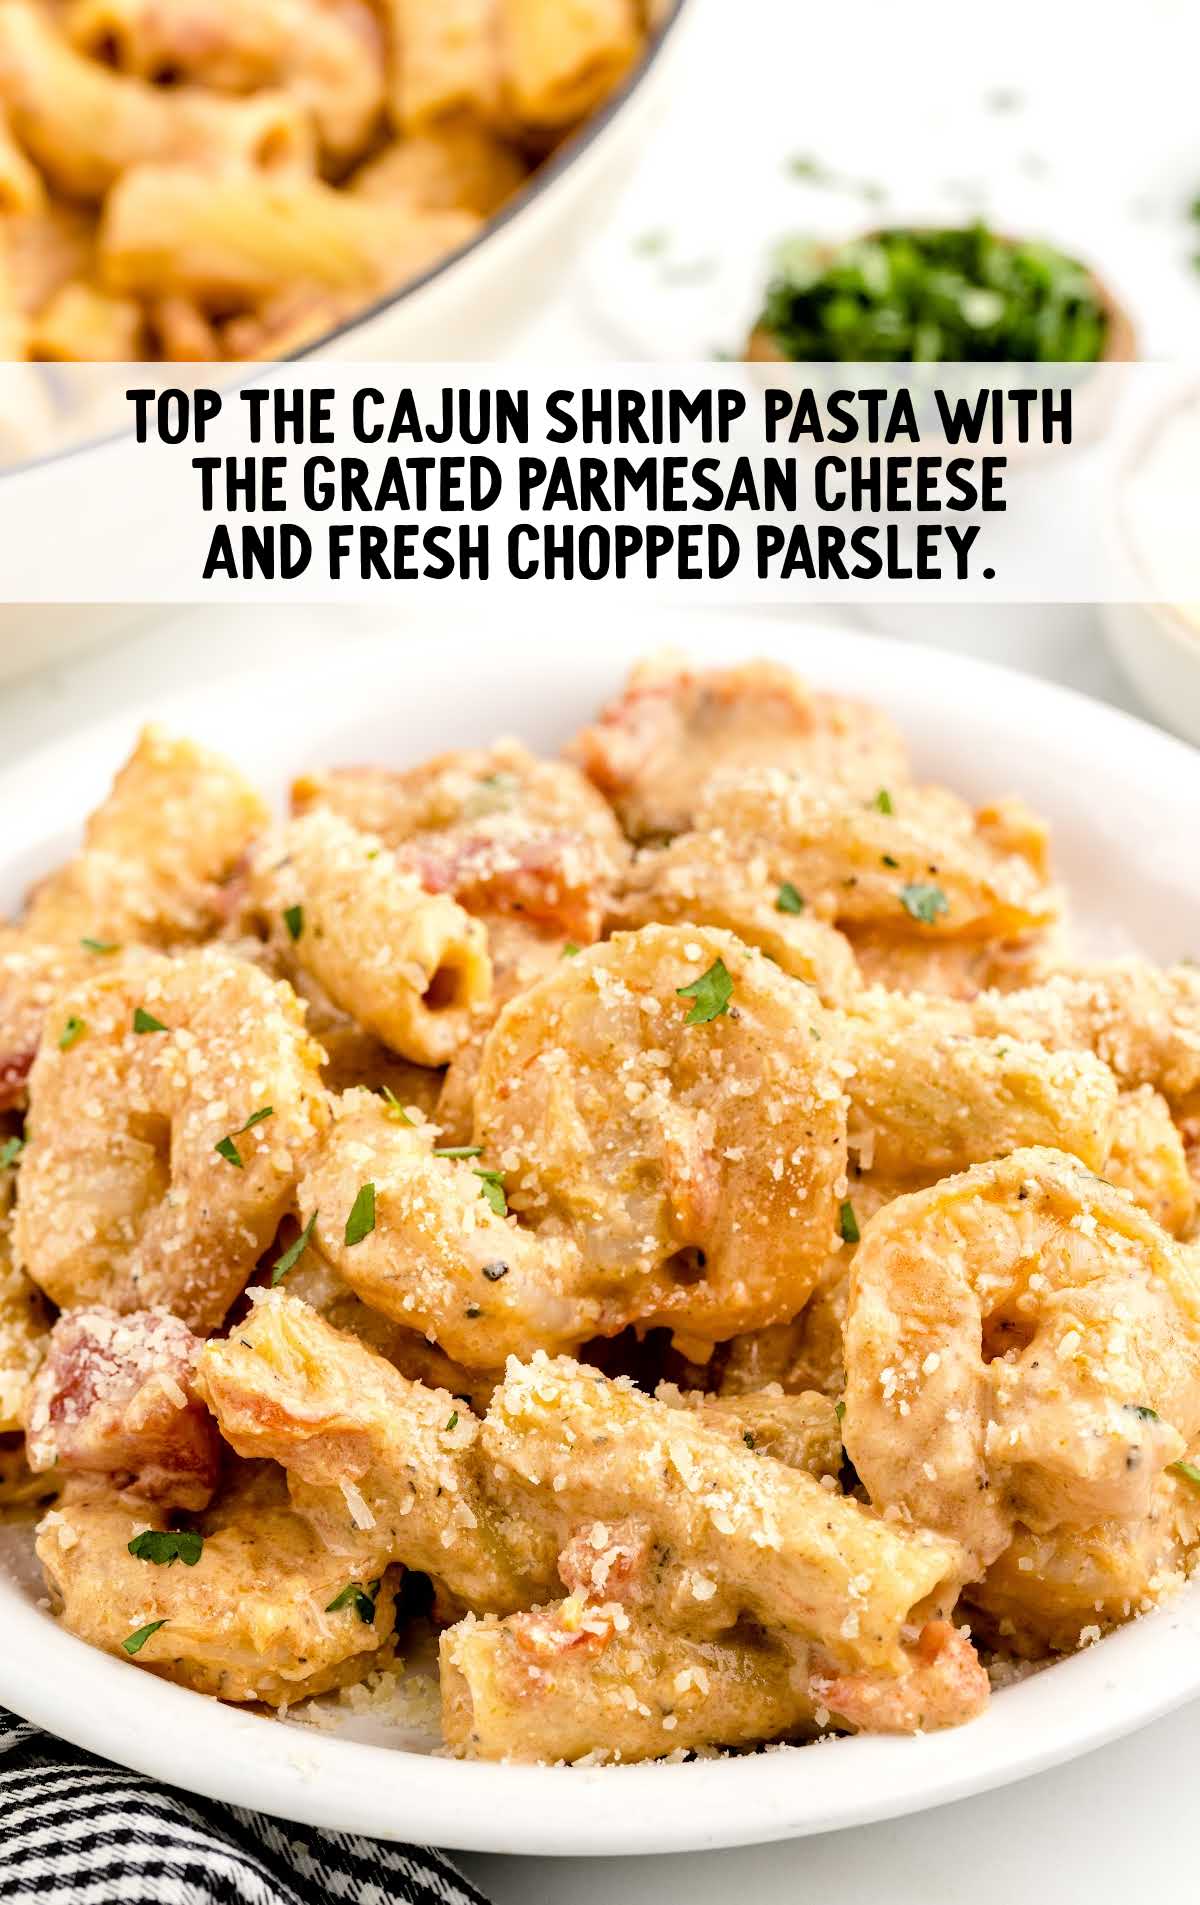 parmesan cheese topped on top of the shrimp pasta